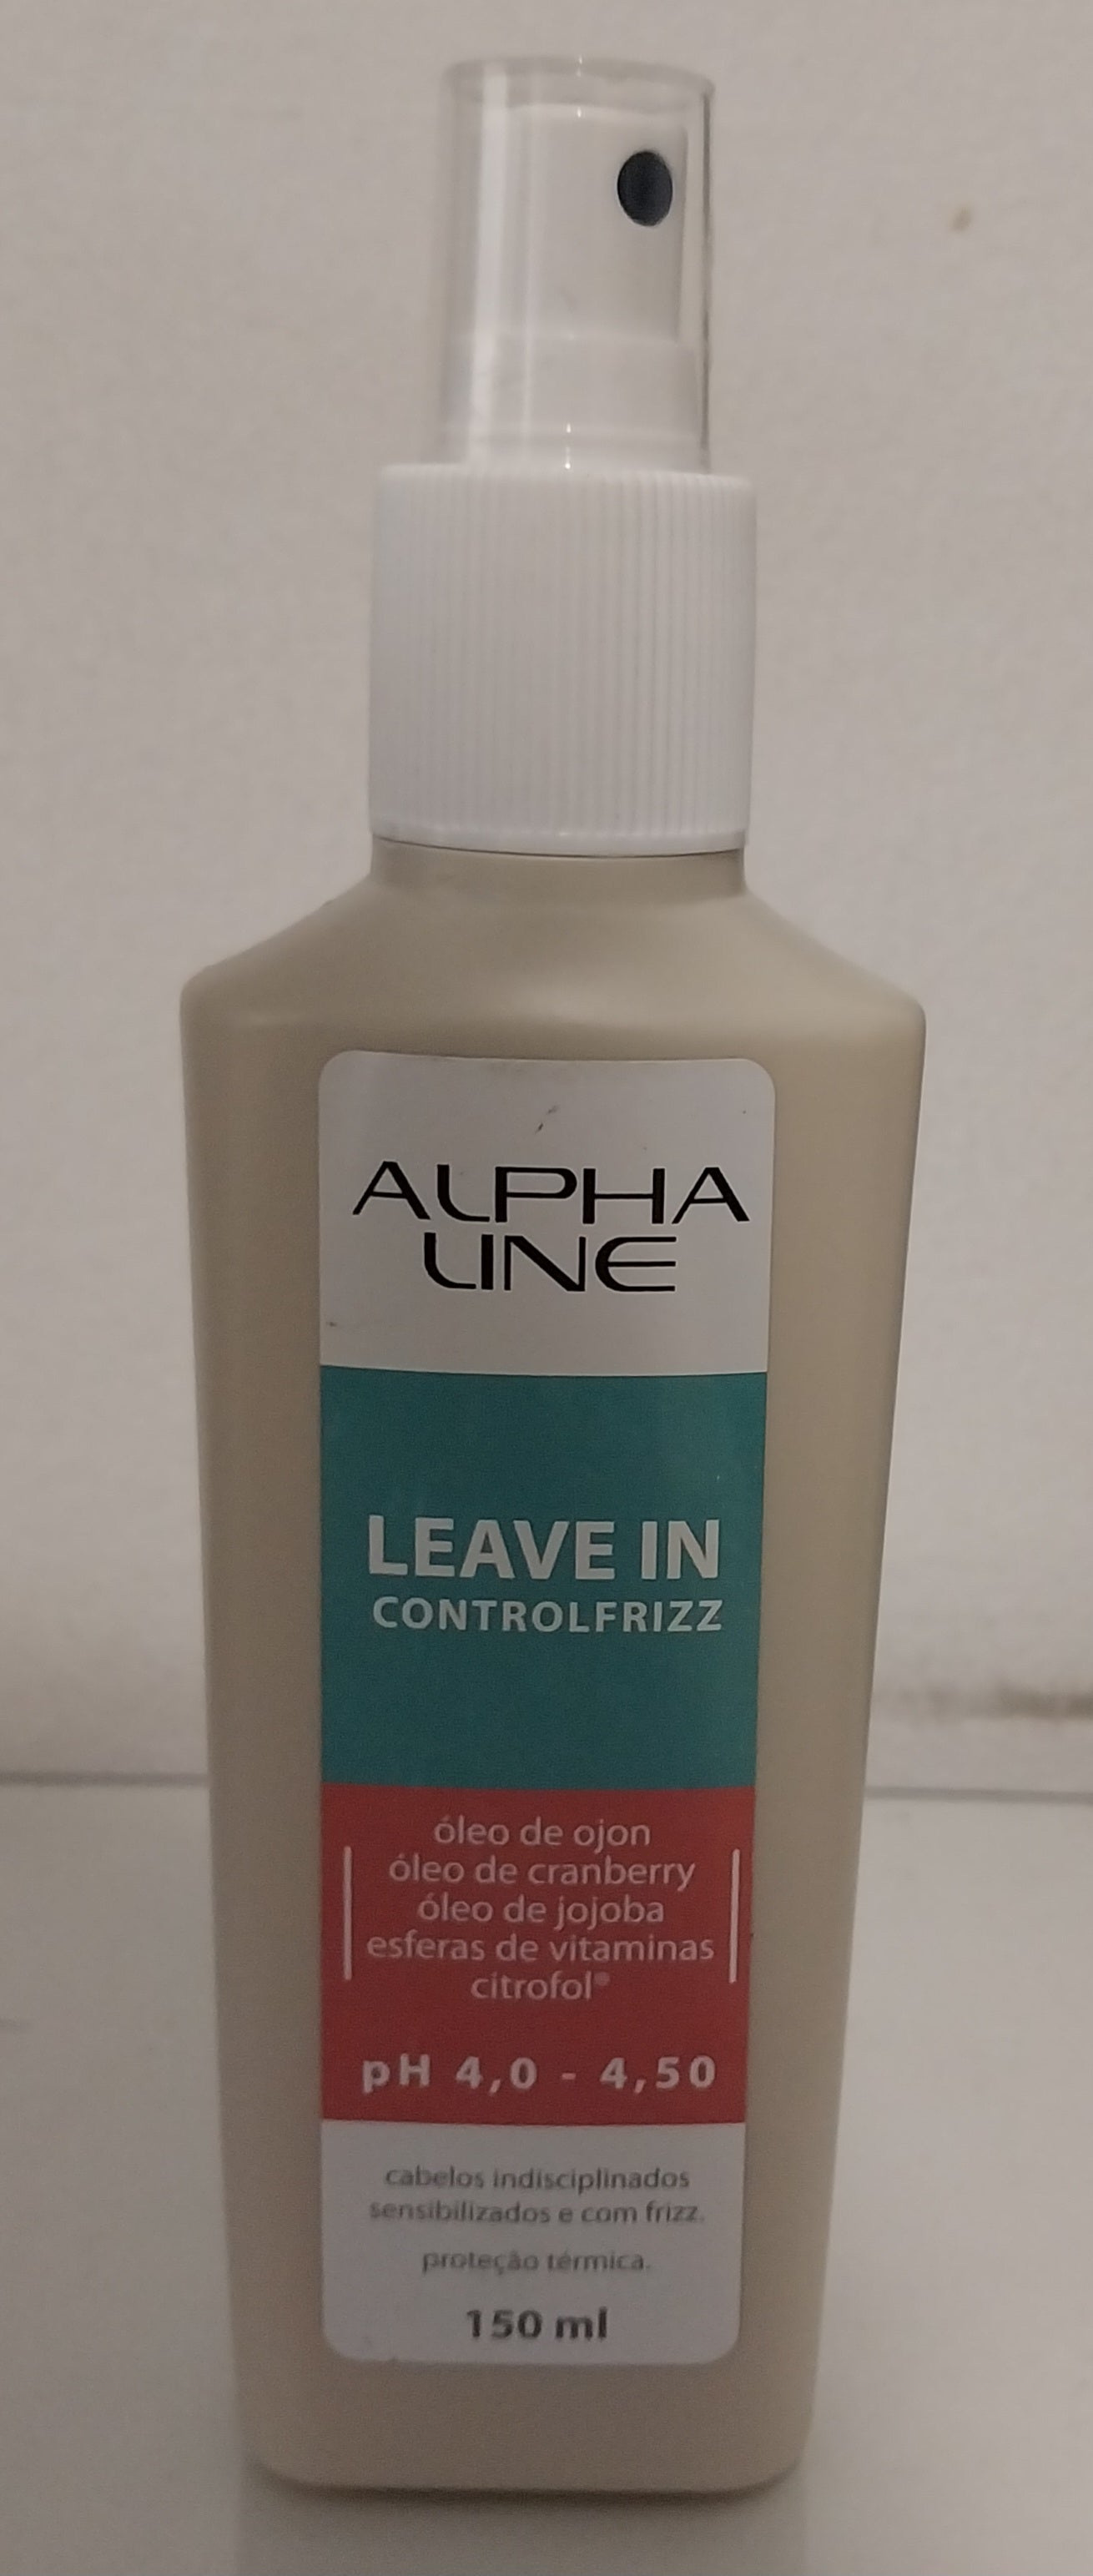 Alpha Line Leave-in Leave-In Control Frizz Hair Moisturizing Softness Treatment 150ml - Alpha Line